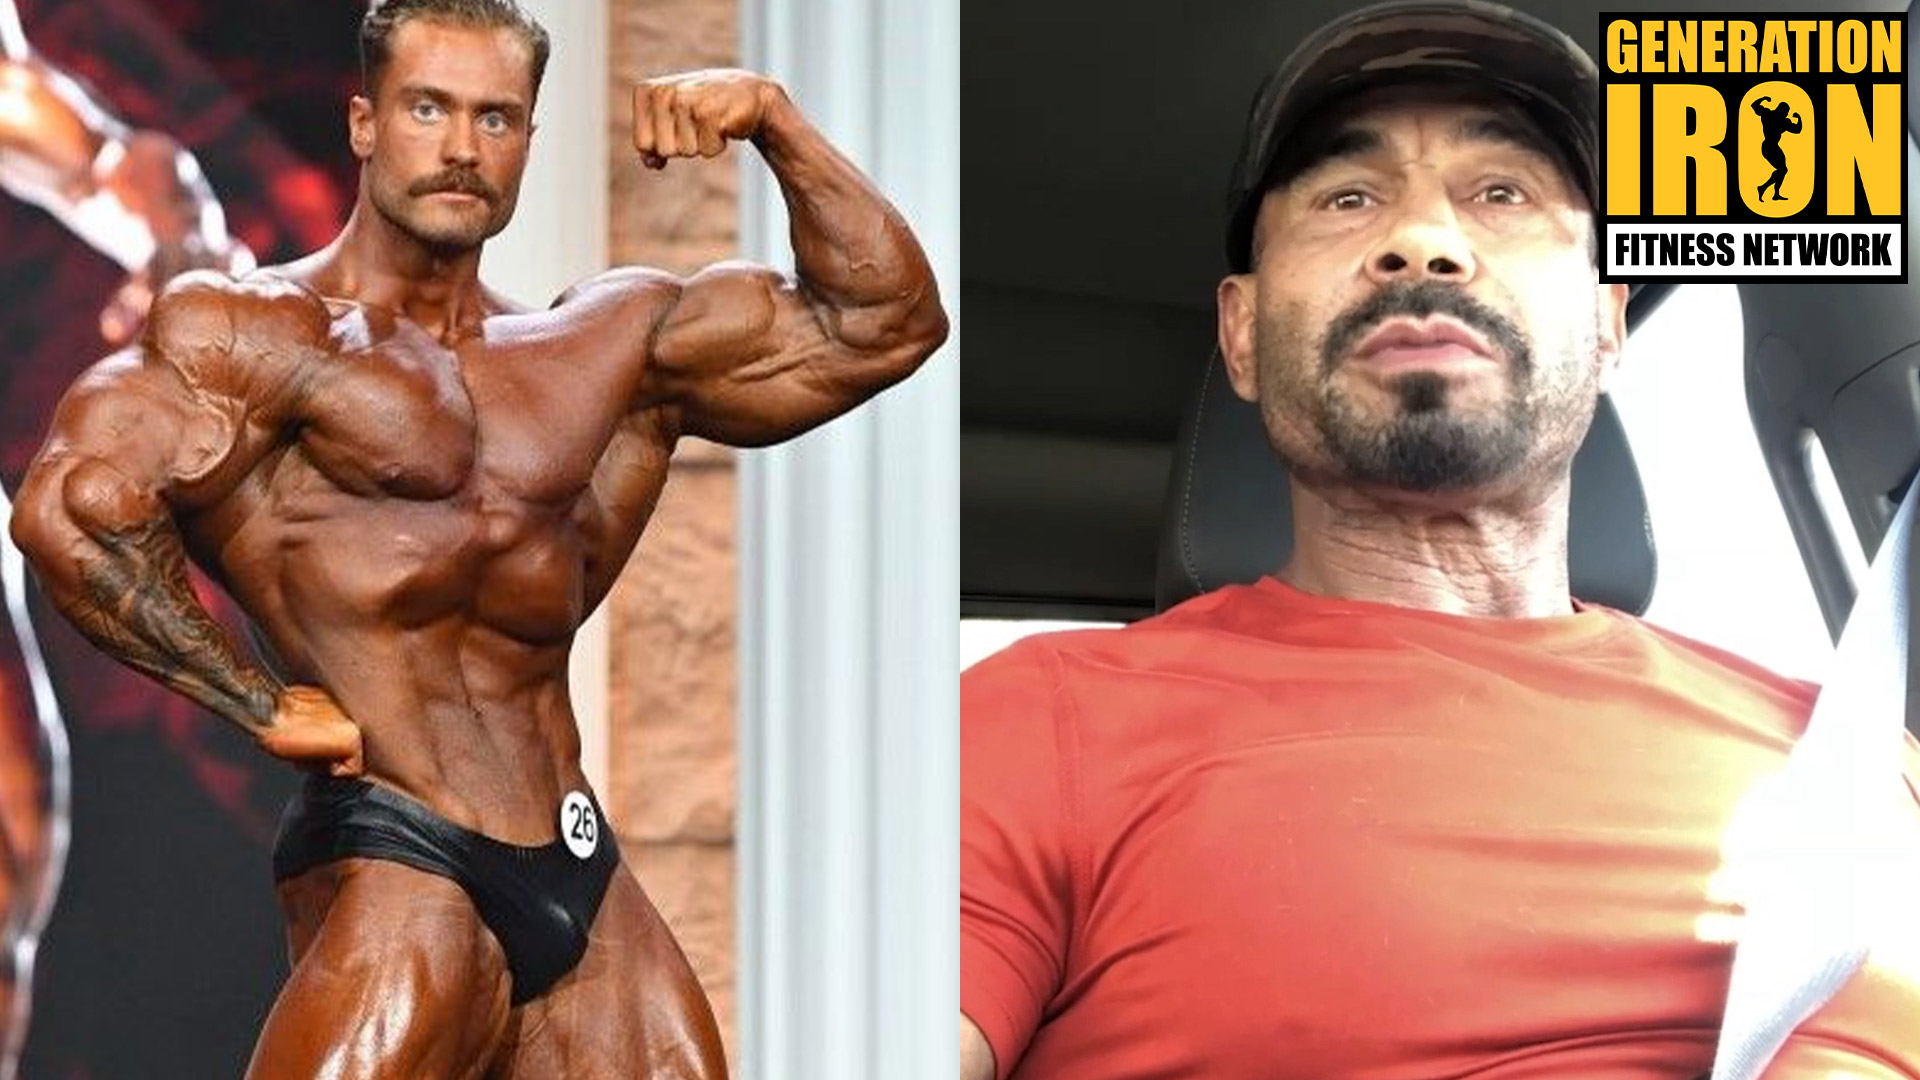 Danny Hester: Chris Bumstead Won Olympia Due To Improvements But Not Perfection